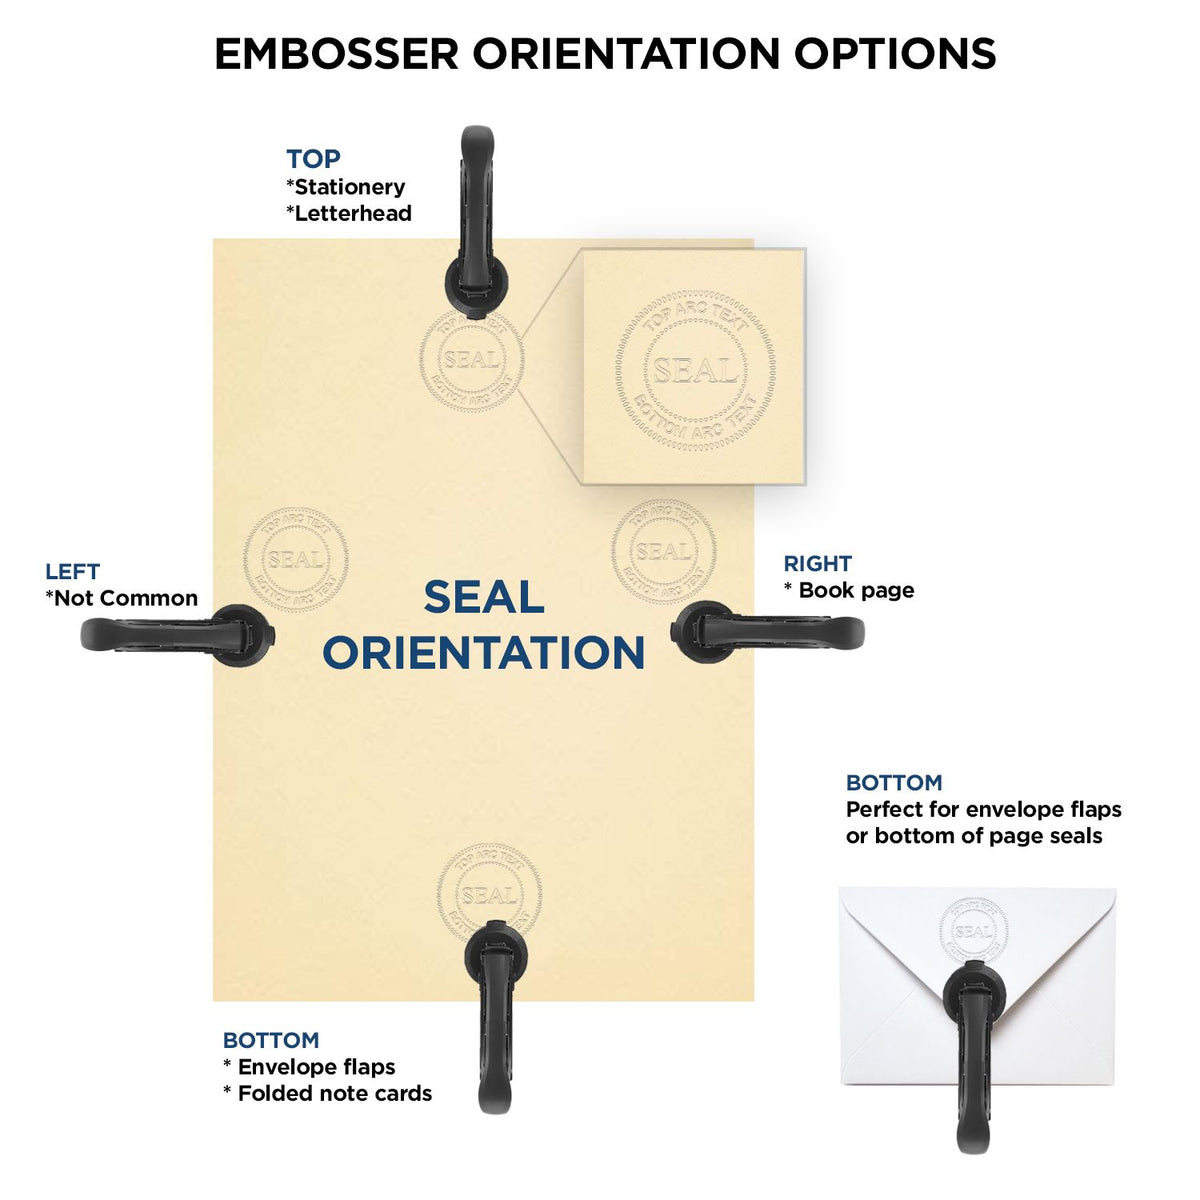 An infographic for the Hybrid Idaho Land Surveyor Seal showing embosser orientation, this is showing examples of a top, bottom, right and left insert.